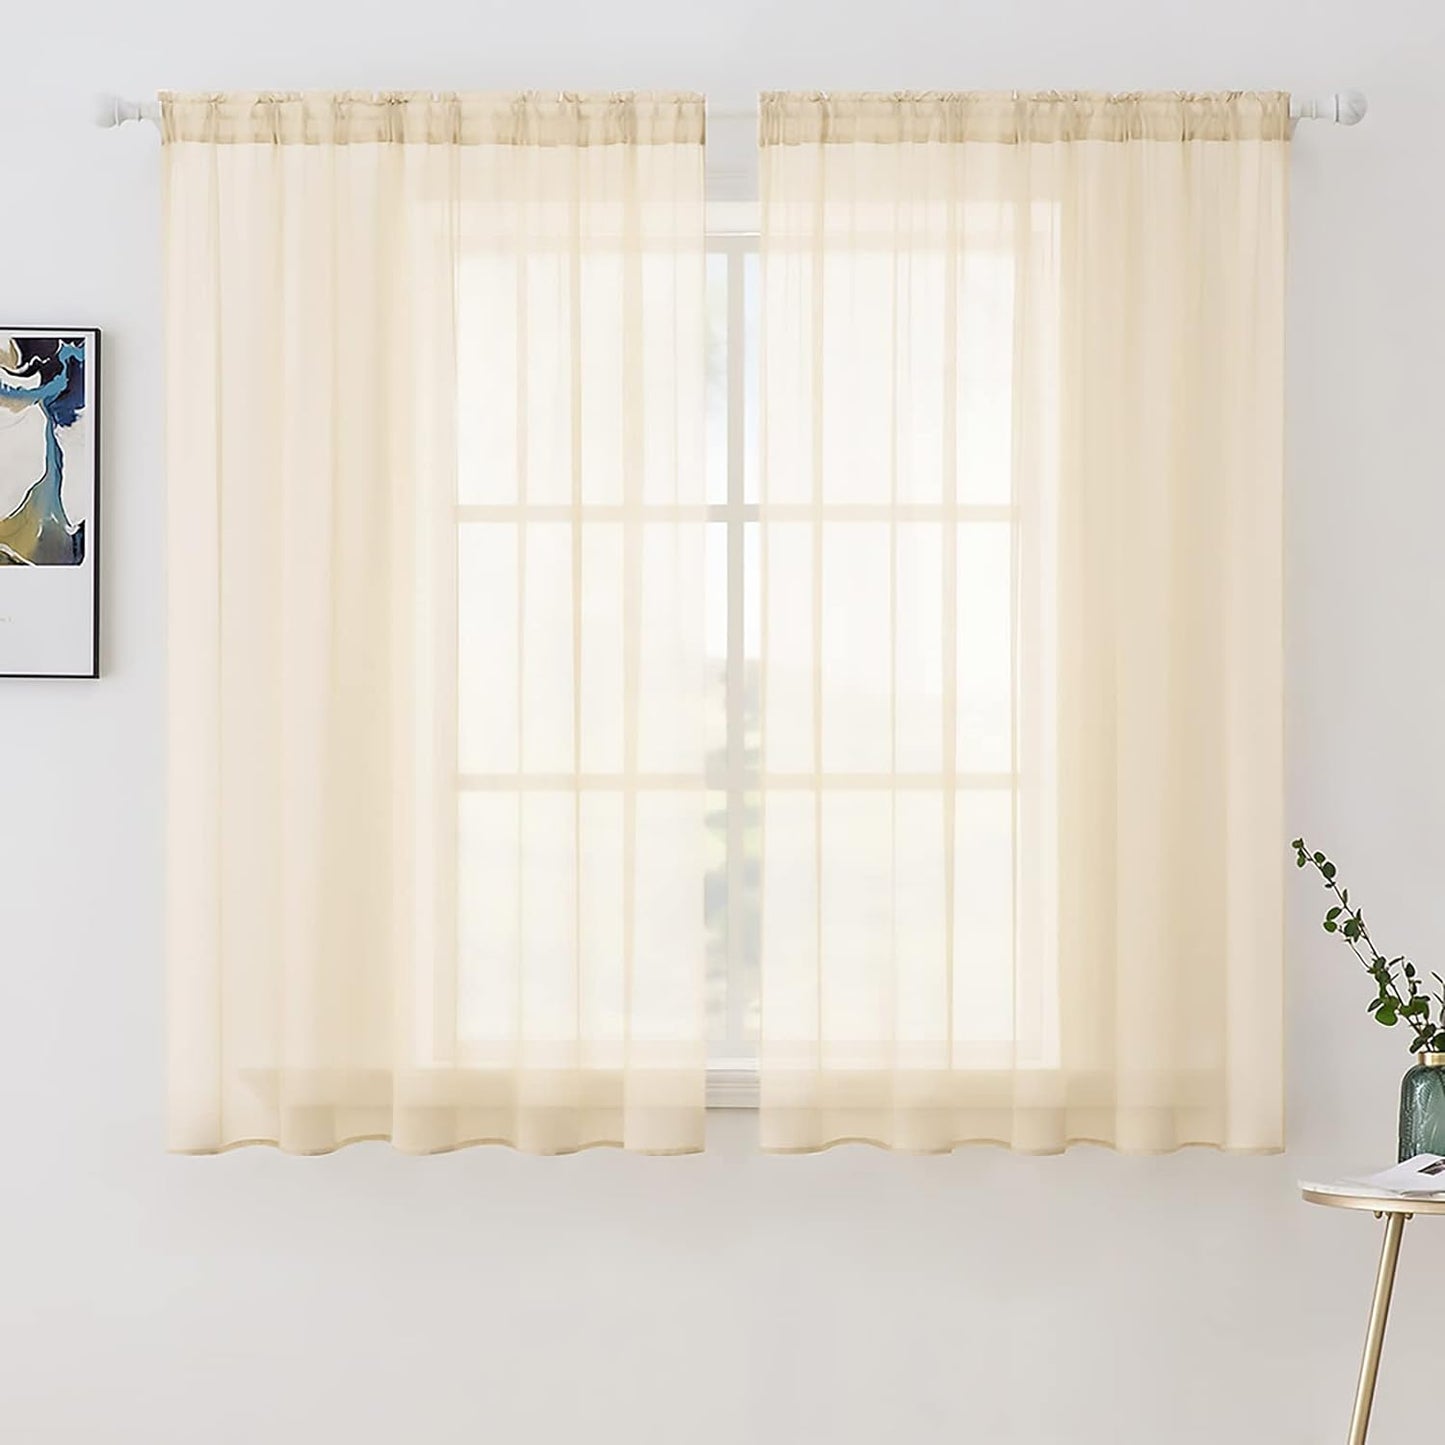 MIULEE White Sheer Curtains 96 Inches Long Window Curtains 2 Panels Solid Color Elegant Window Voile Panels/Drapes/Treatment for Bedroom Living Room (54 X 96 Inches White)  MIULEE Cream Beige 54''W X 45''L 